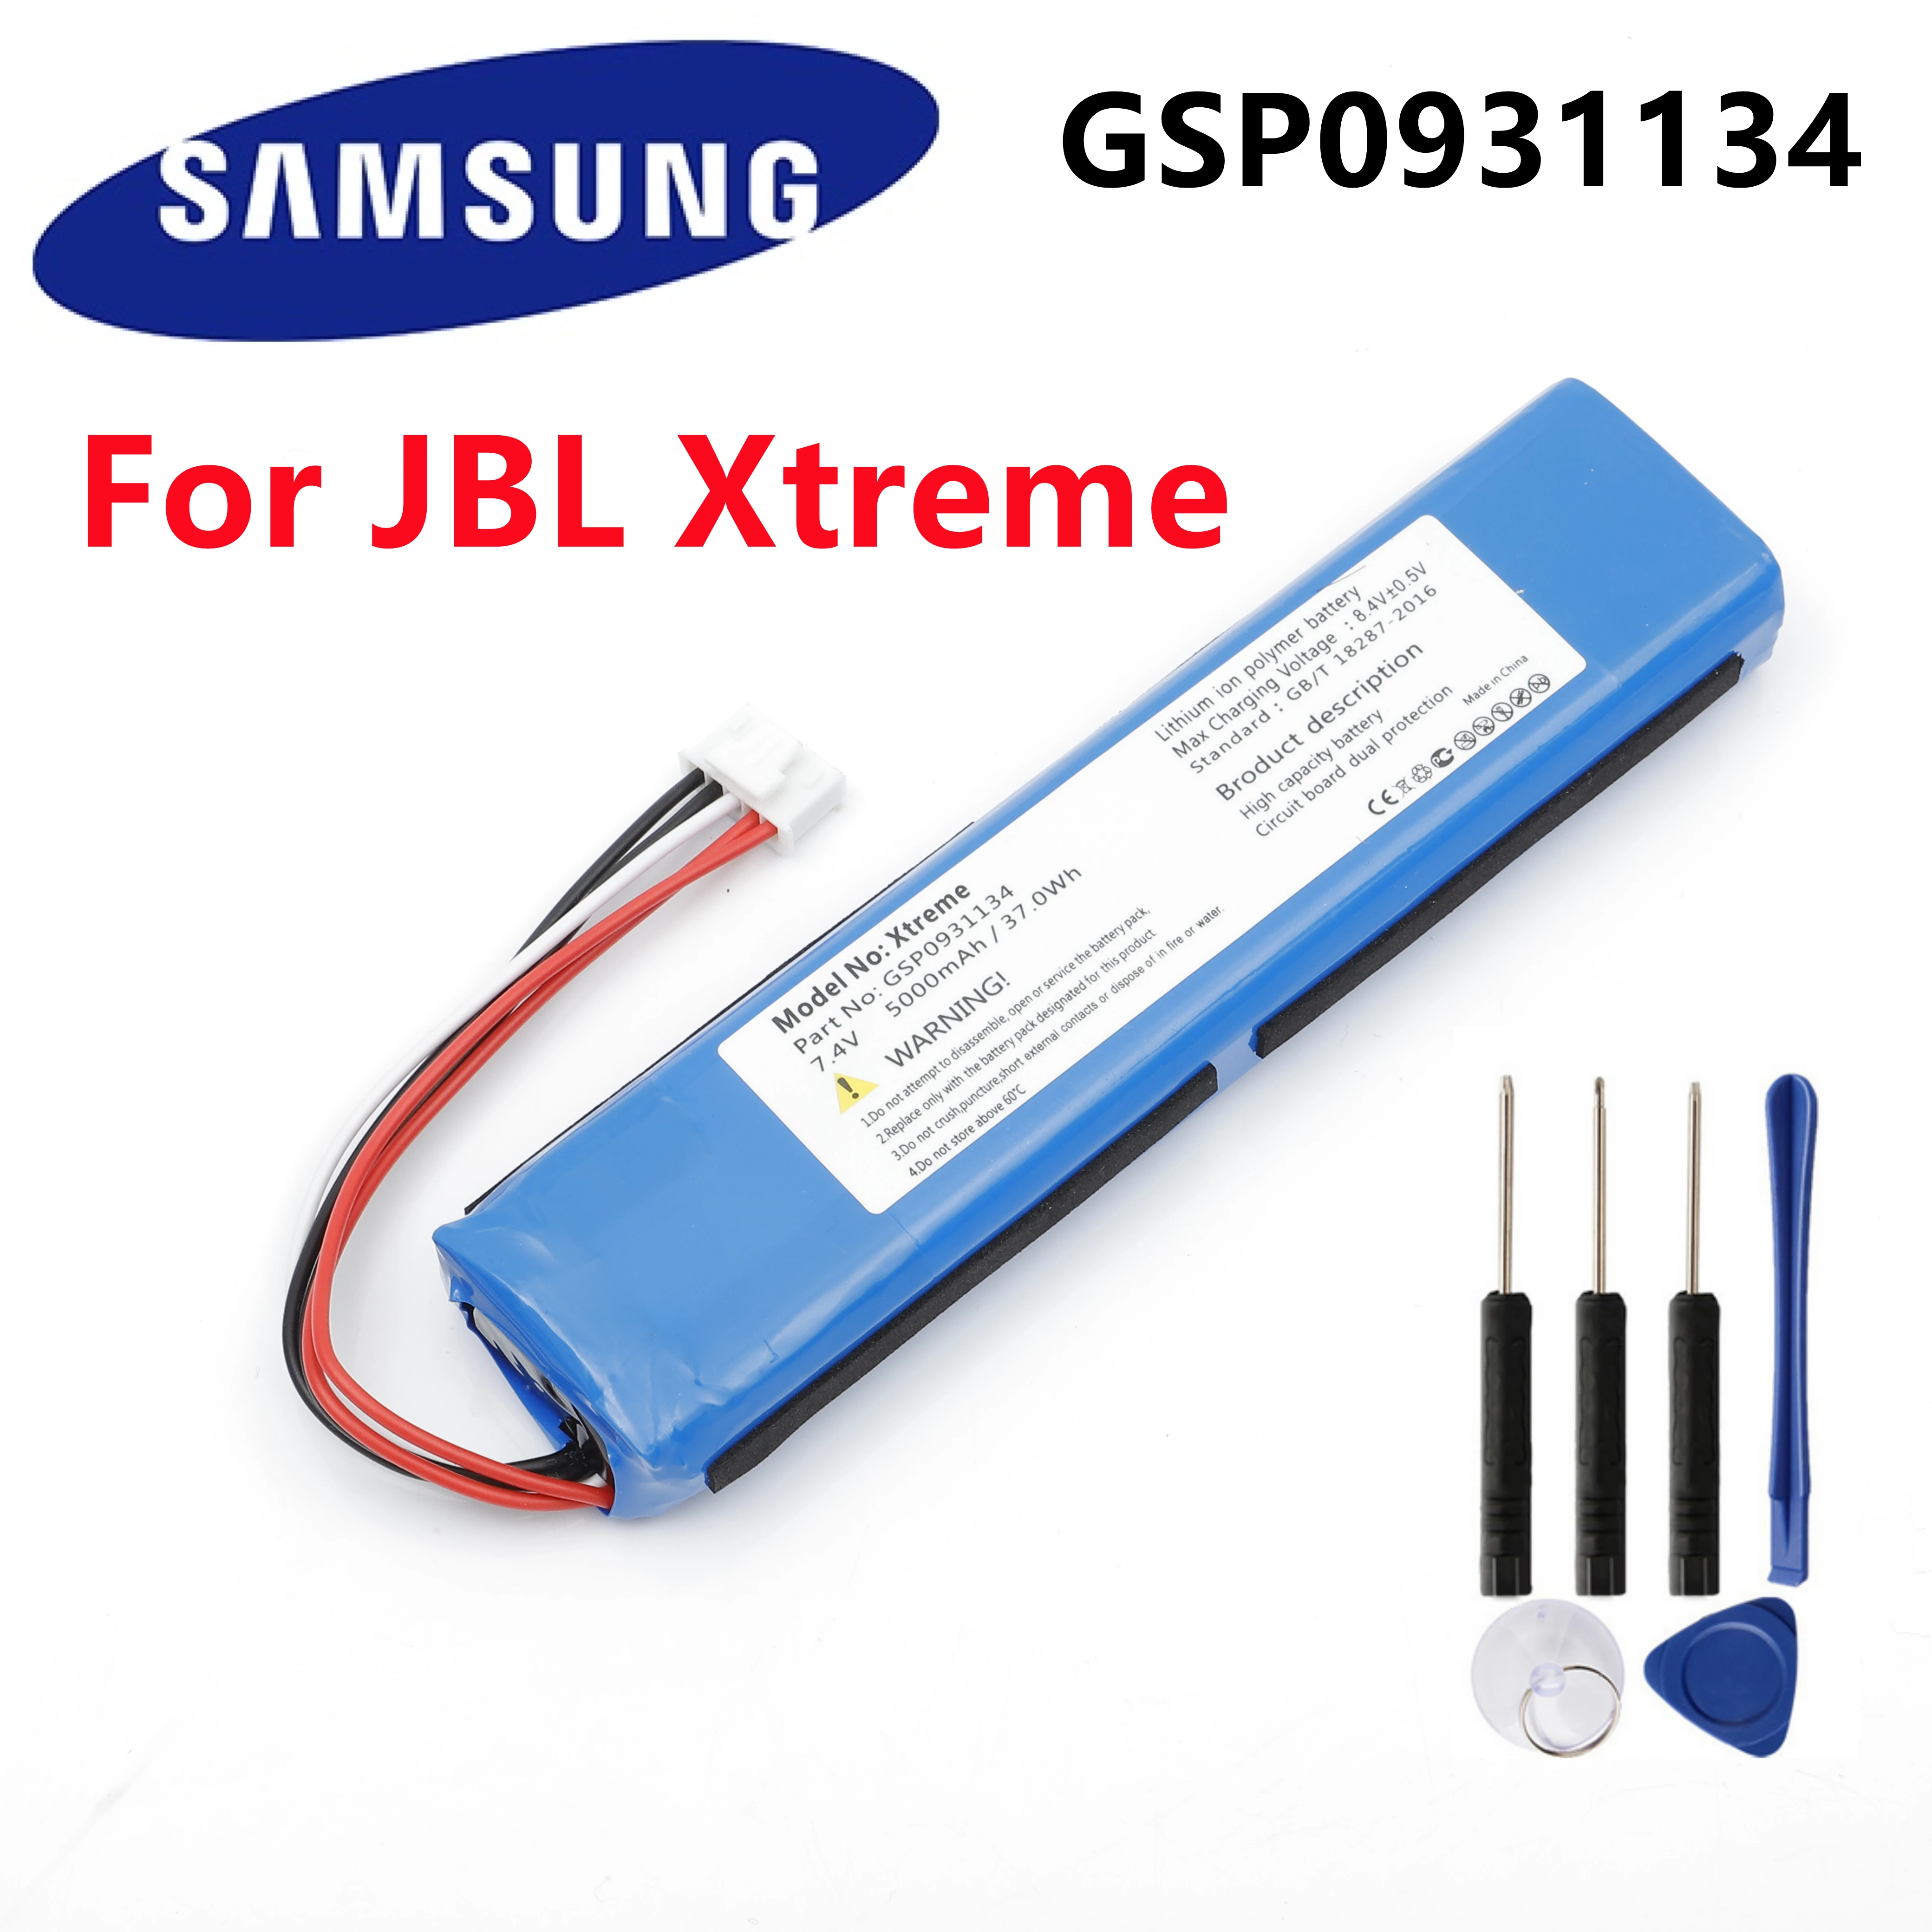 Gsp0931134 Speaker Battery For Jbl Xtreme / Xtreme 1 / Xtreme1 Batteries  Tracking Number + Free Tools - Mobile Phone Batteries - AliExpress